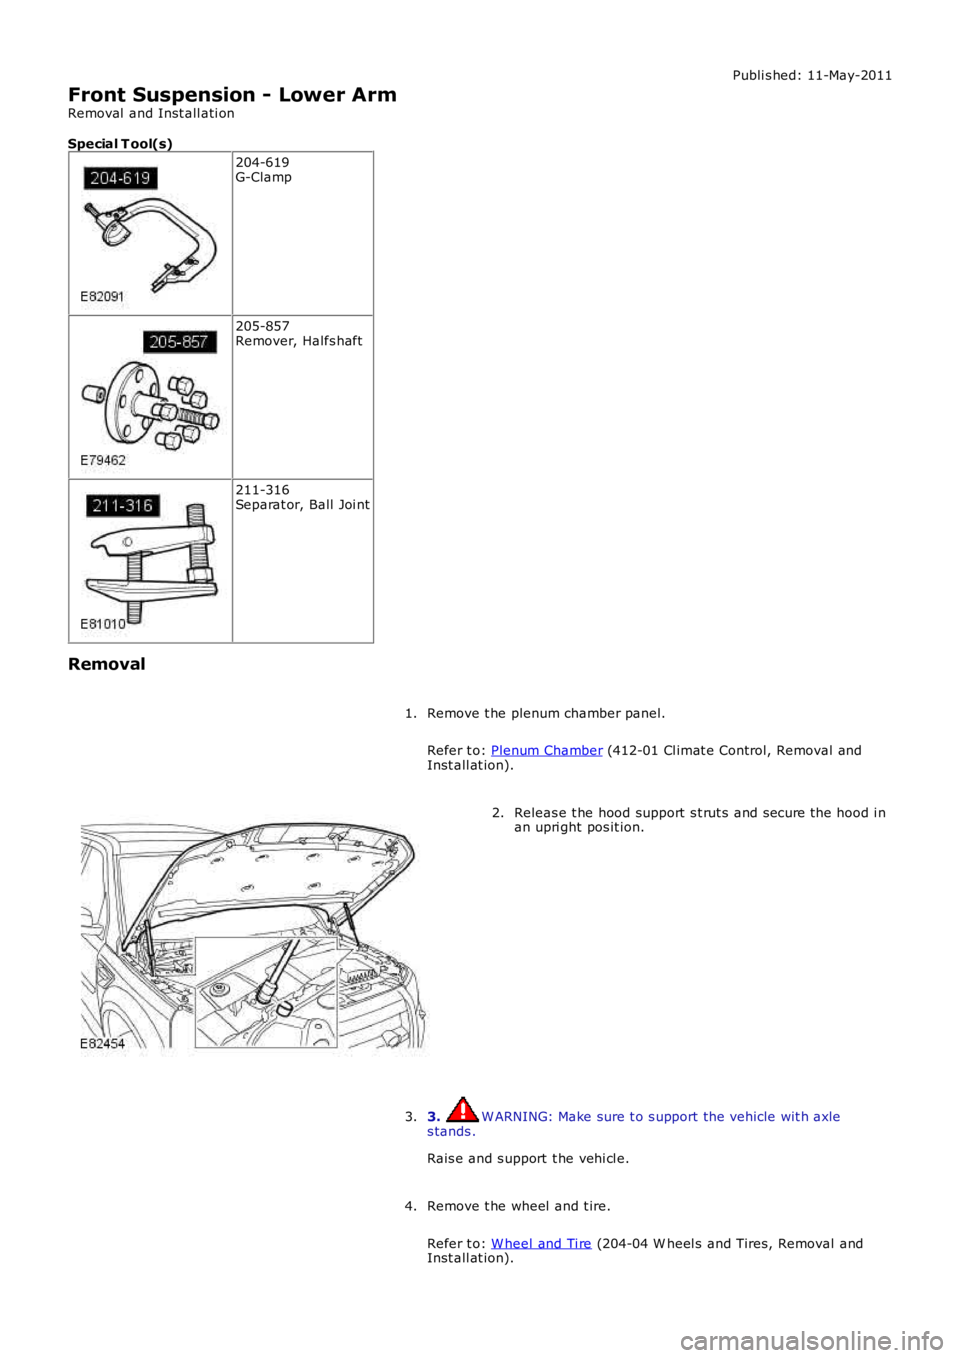 LAND ROVER FRELANDER 2 2006  Repair Manual Publi s hed: 11-May-2011
Front Suspension - Lower Arm
Removal  and Inst all ati on
Special T ool(s)
204-619G-Clamp
205-857Remover, Halfs haft
211-316Separat or, Ball Joi nt
Removal
Remove t he plenum 